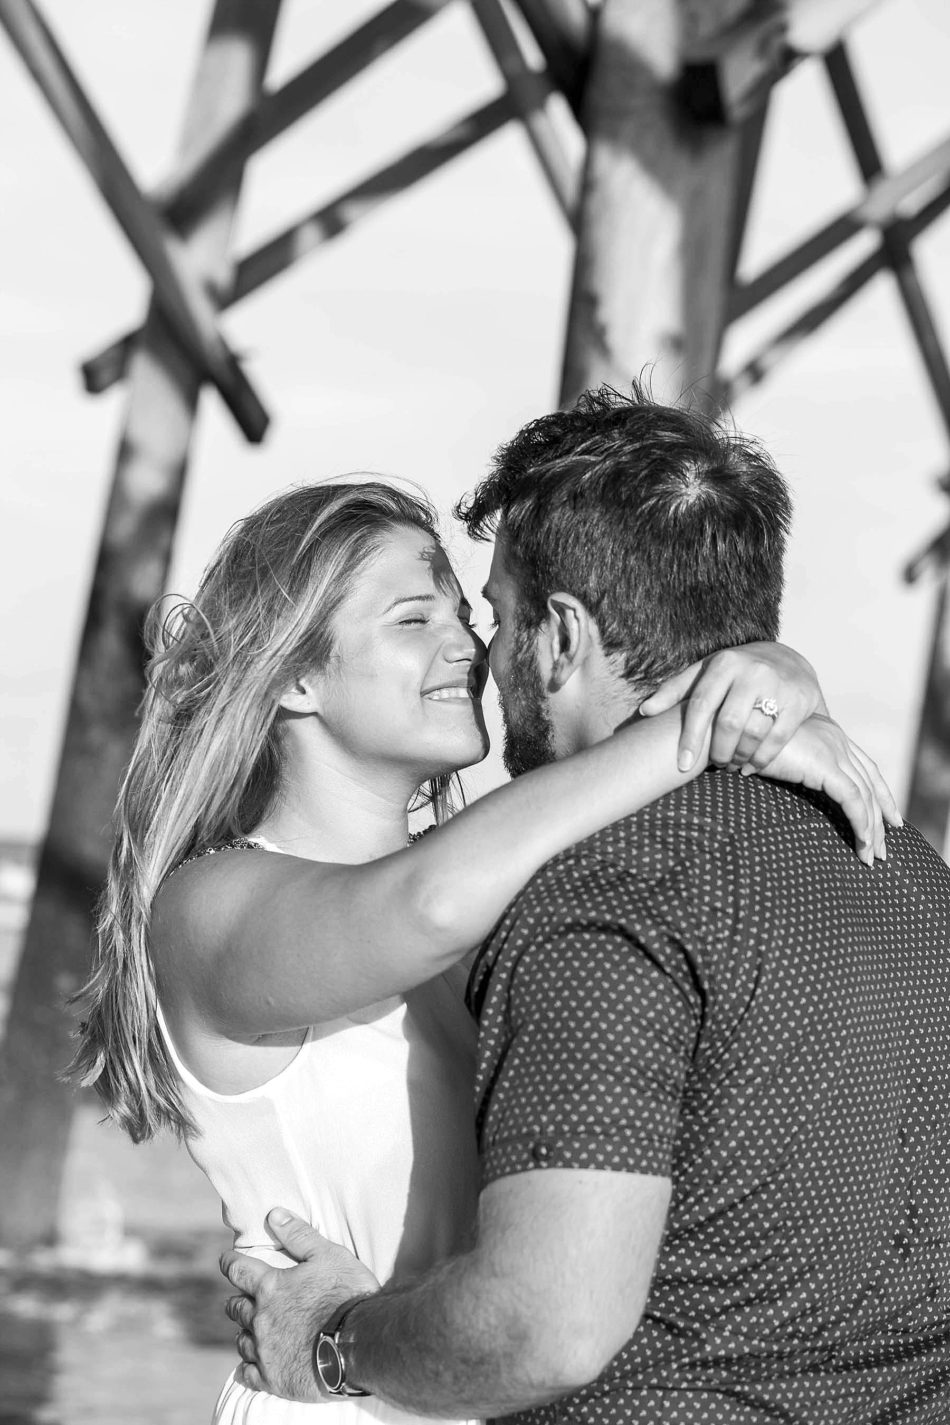 Engaged Couple under fishing pier, Folly beach in Charleston, South Carolina Kate Timbers Photography. http://katetimbers.com #katetimbersphotography // Charleston Photography // Inspiration